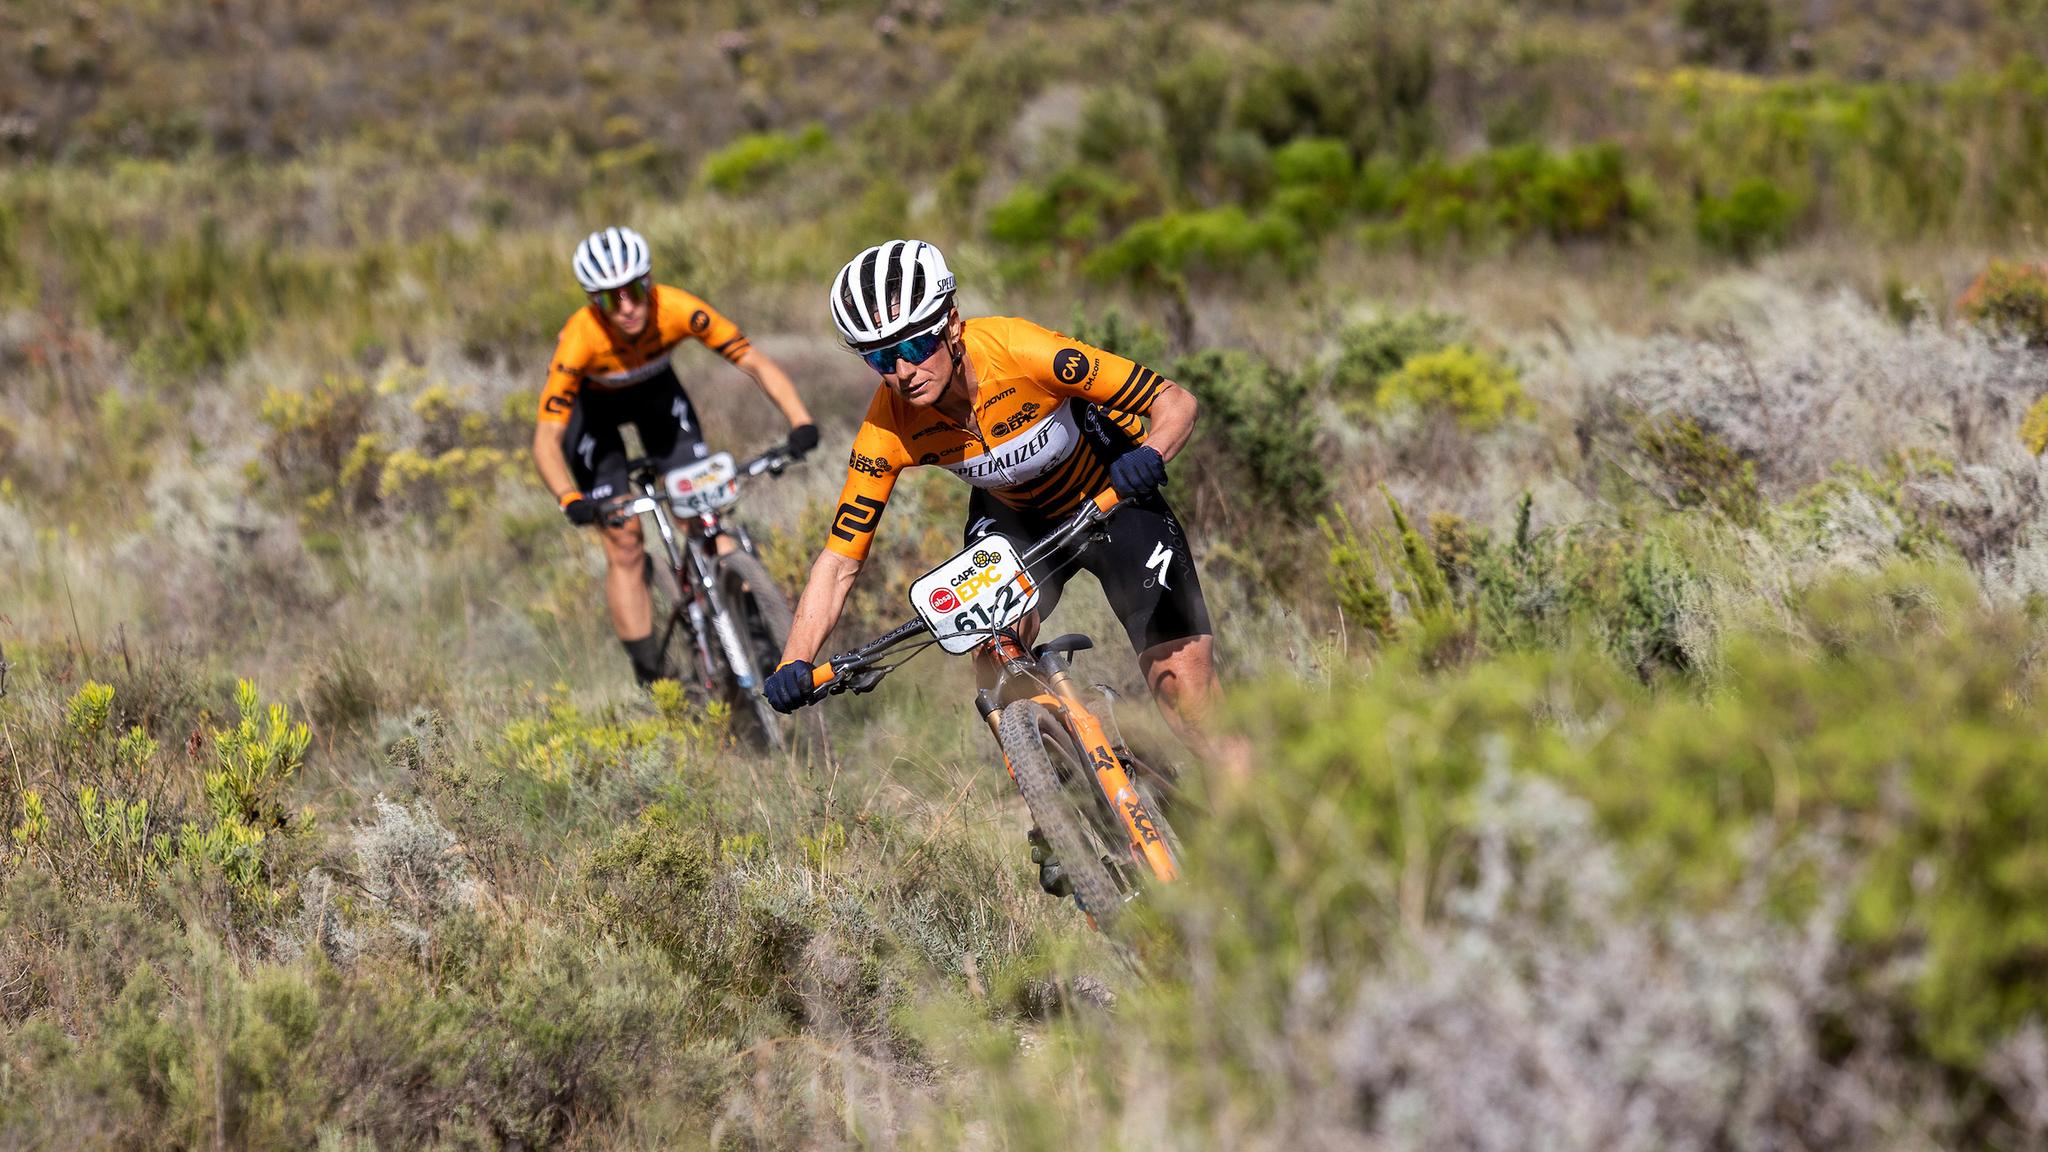 Absa Cape Epic 2023, Stage 1